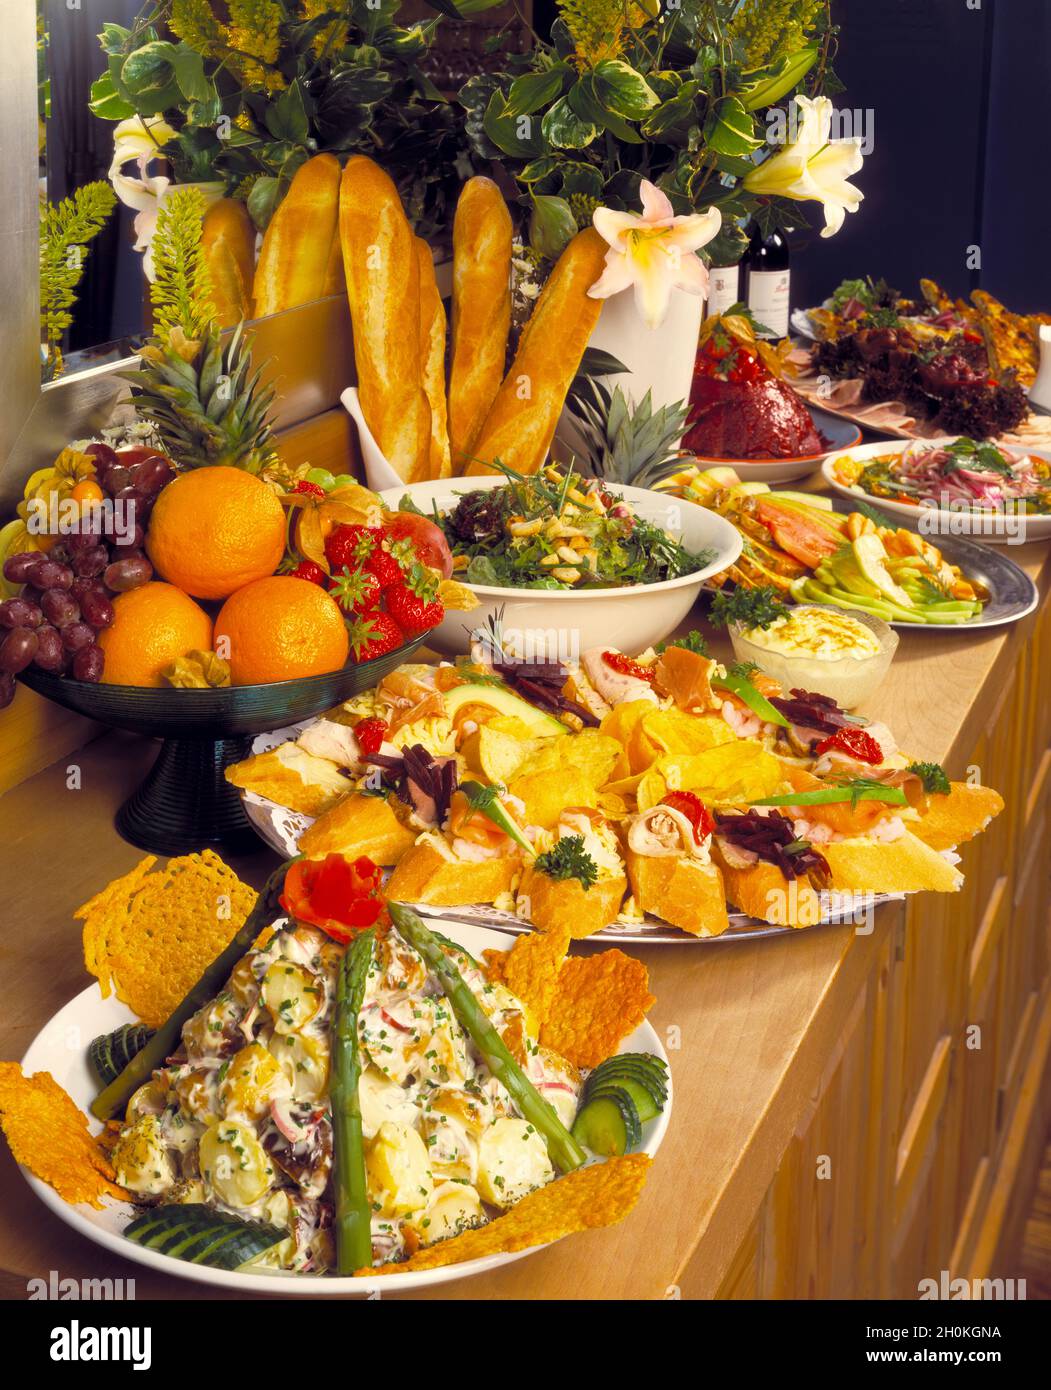 Portrait format, buffet dishes  with mirror , flowers, baguettes, french bread, potato salad, smoked salmon, chicken dishes on light wood table Stock Photo